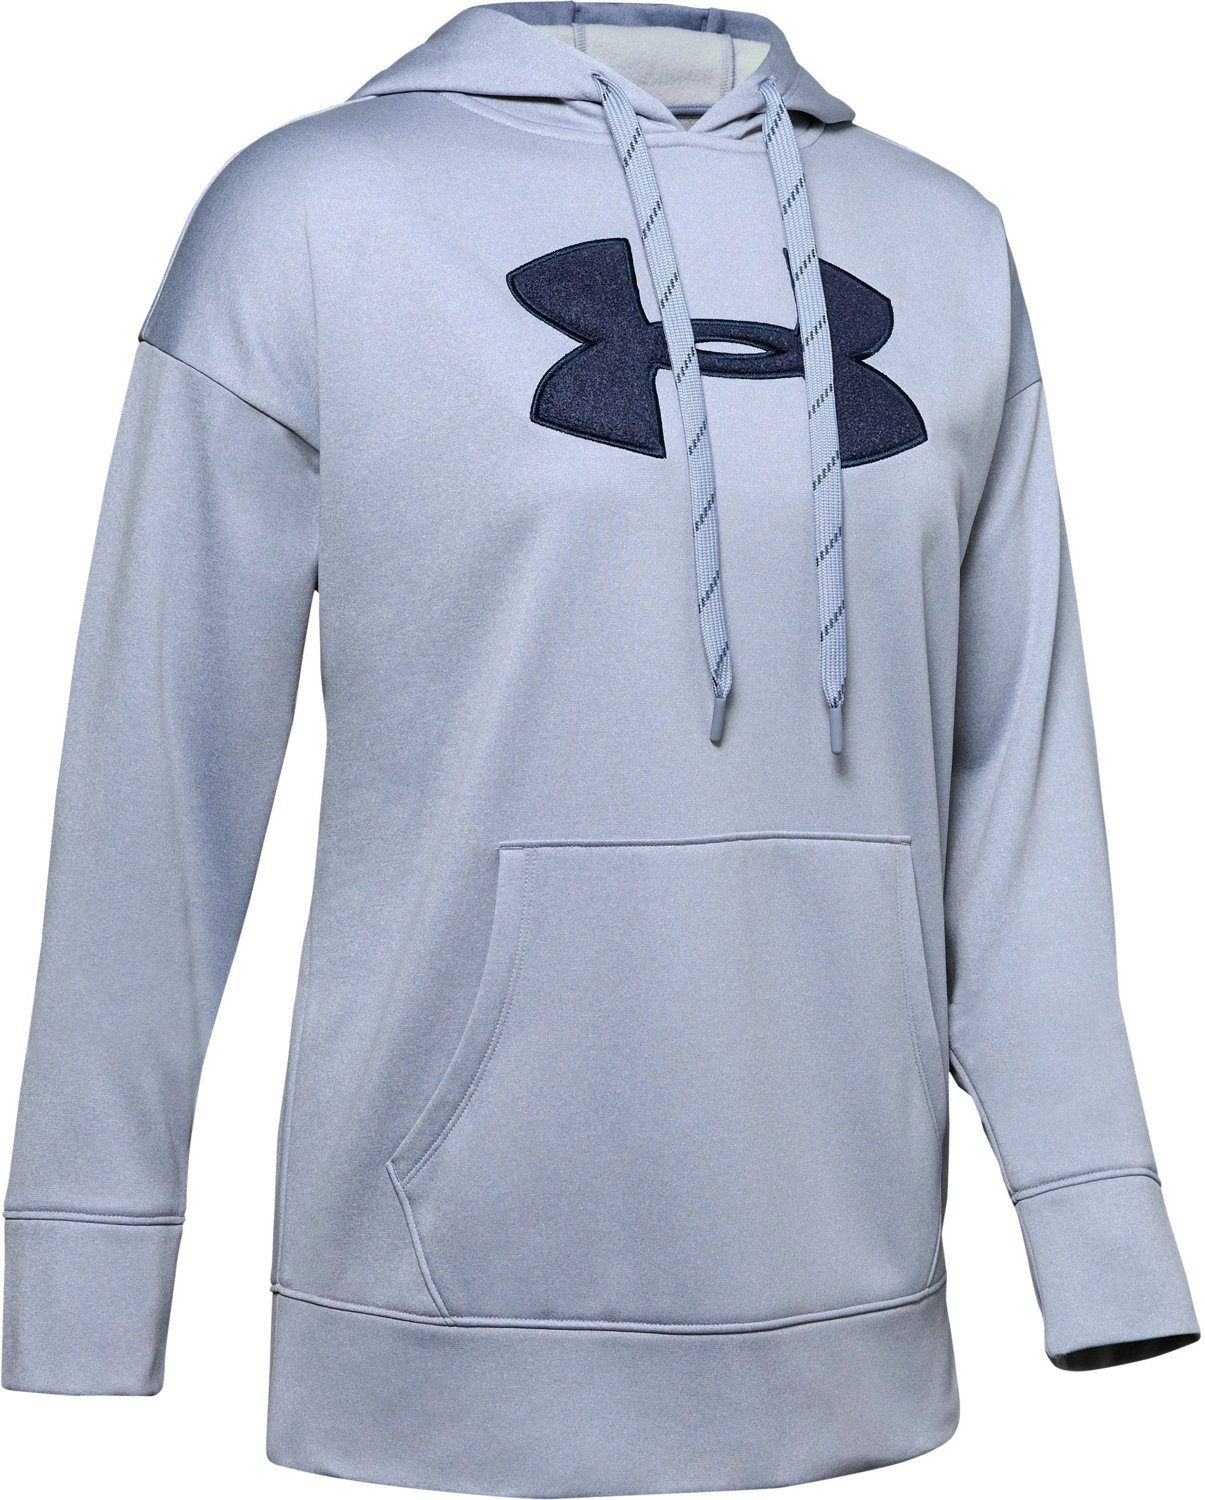 academy sports under armour hoodies